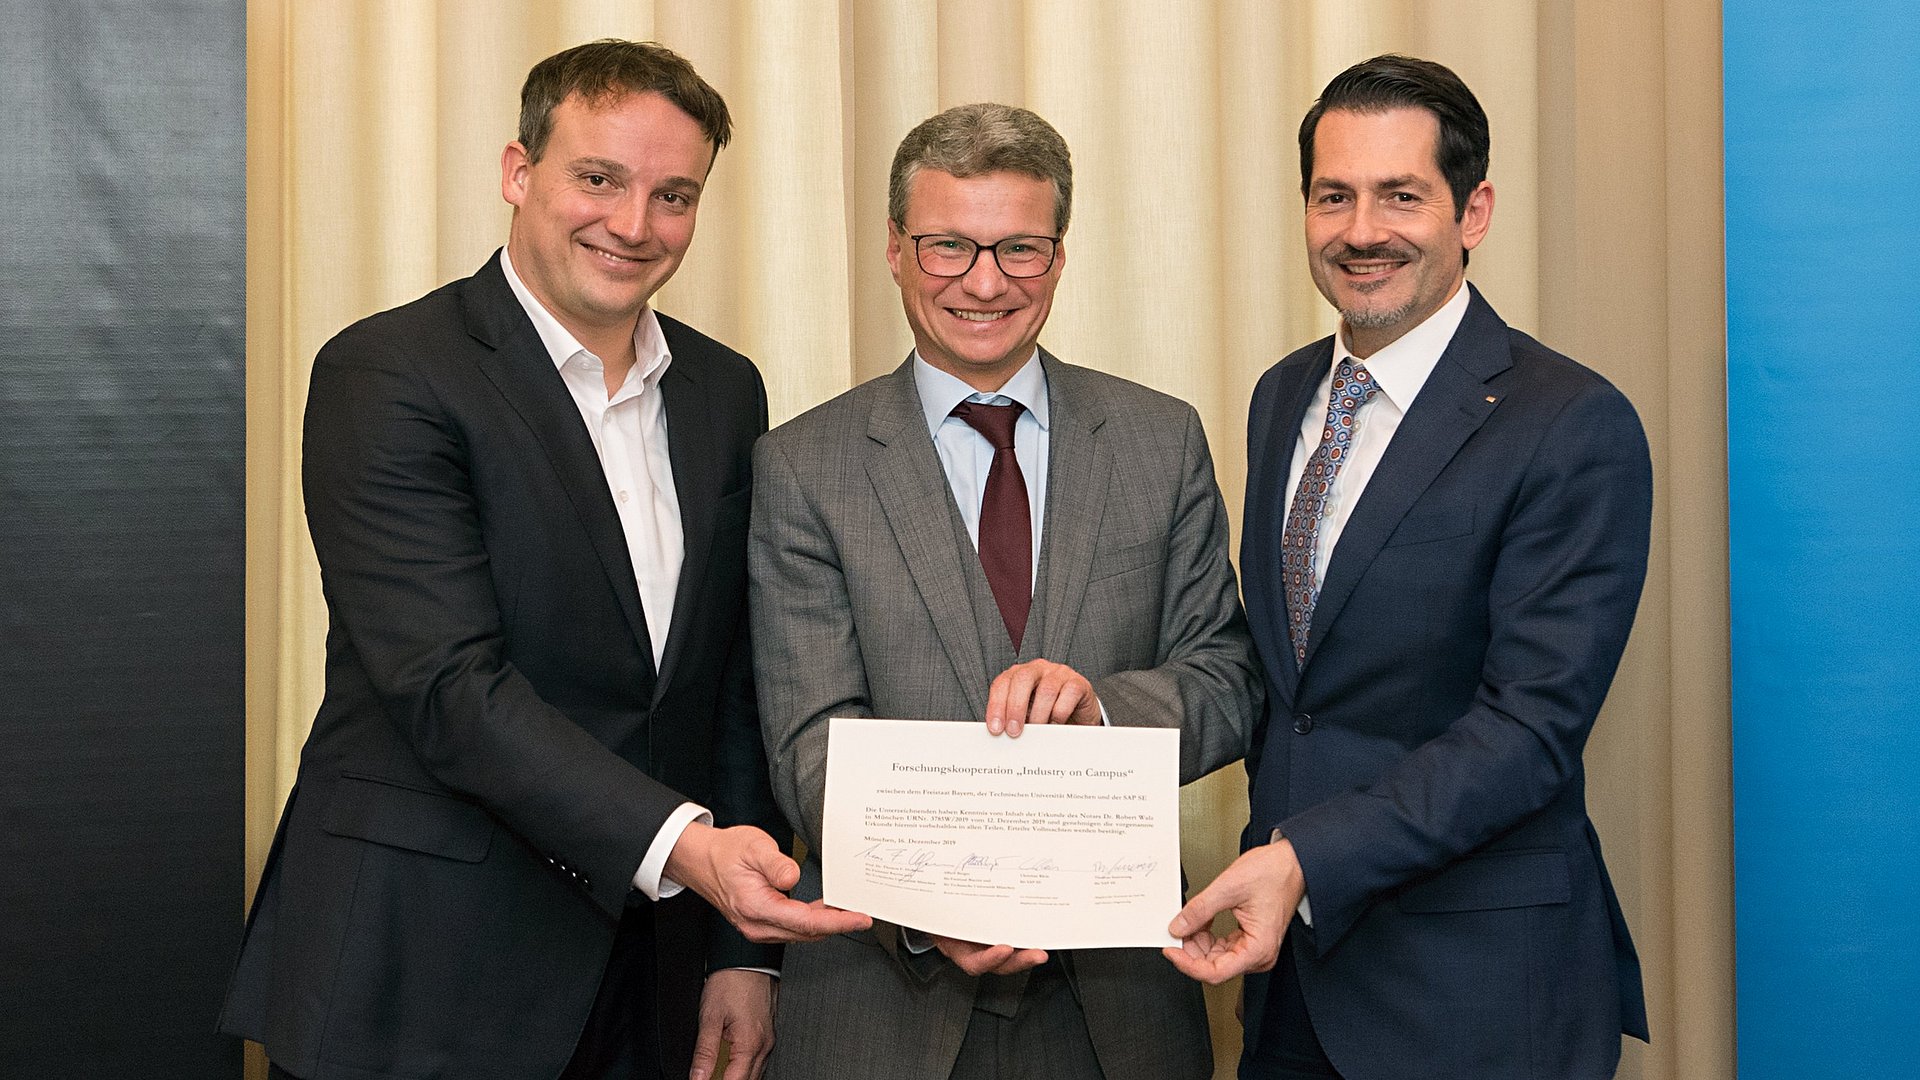 SAP Co-CEO Christian Klein, Science Minister Bernd Sibler, and TUM President Prof. Thomas F. Hofmann (from left) after signing the cooperation agreement.